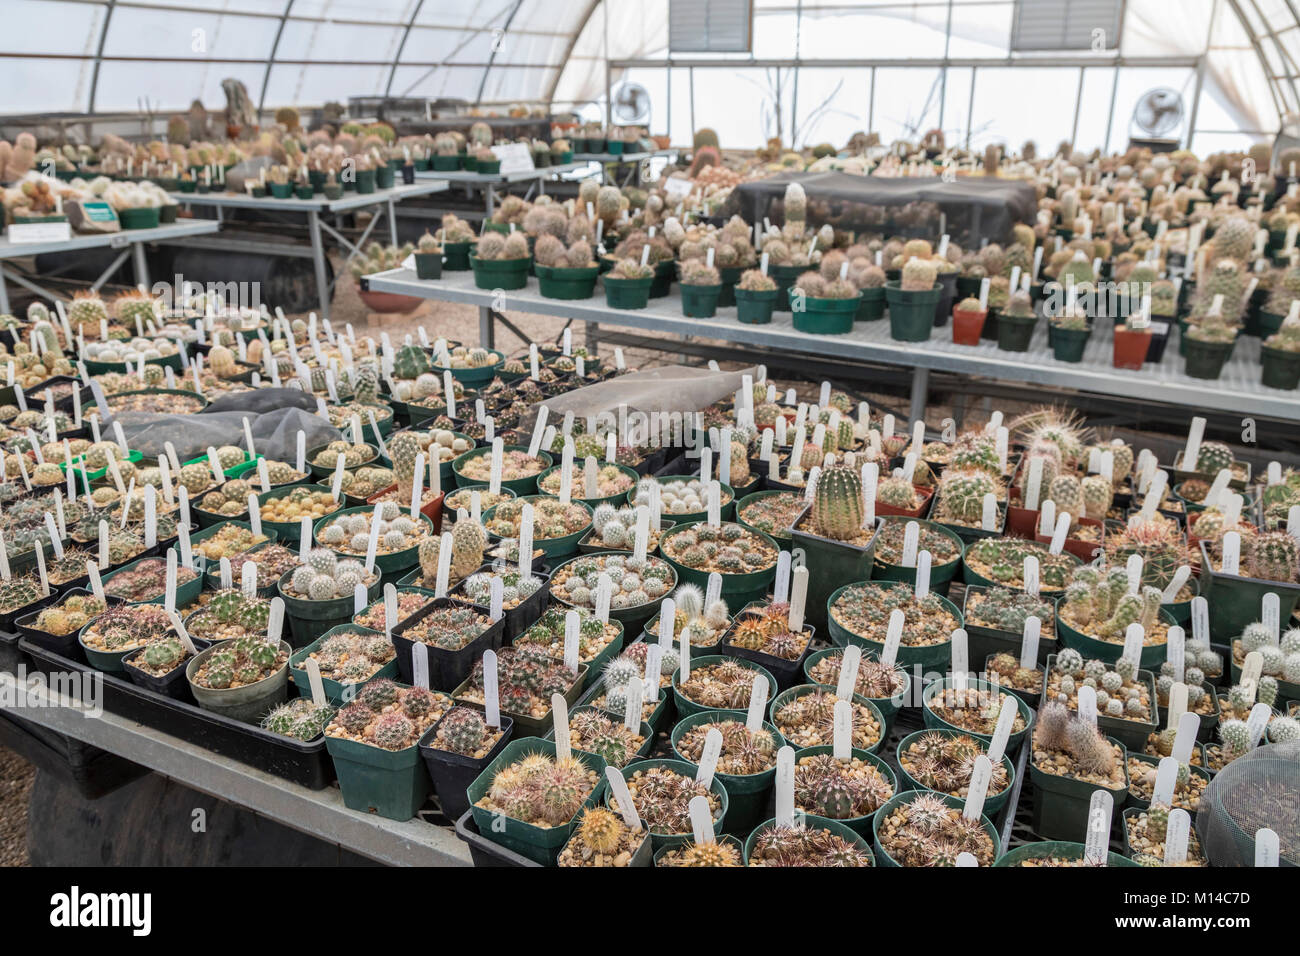 Fort Davis, Texas - The Chihuahuan Desert Research Institute's Cactus Greenhouse Collection, consisting of cactus species from both the U.S. and Mexic Stock Photo